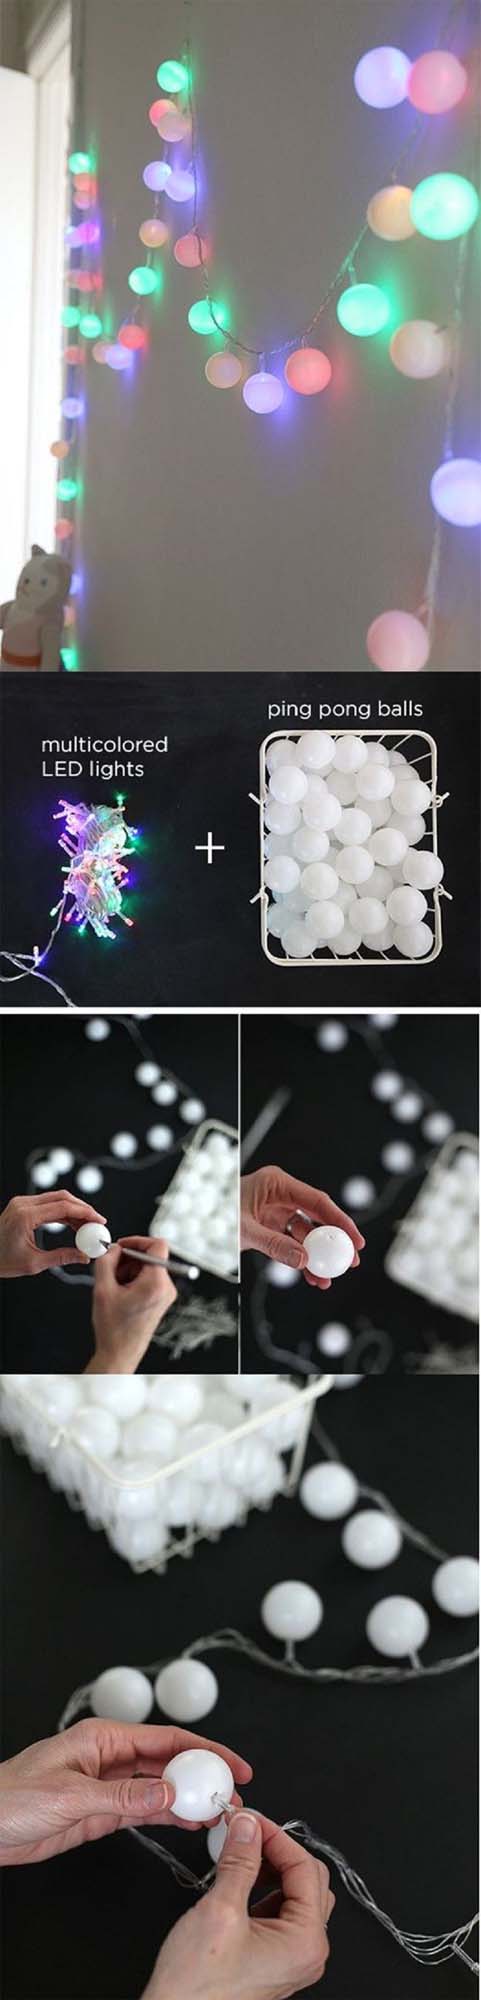 Multi-colored Party Lights: a Better Use for Ping-pong Balls #roomdecorationwithlights #decorhomeideas